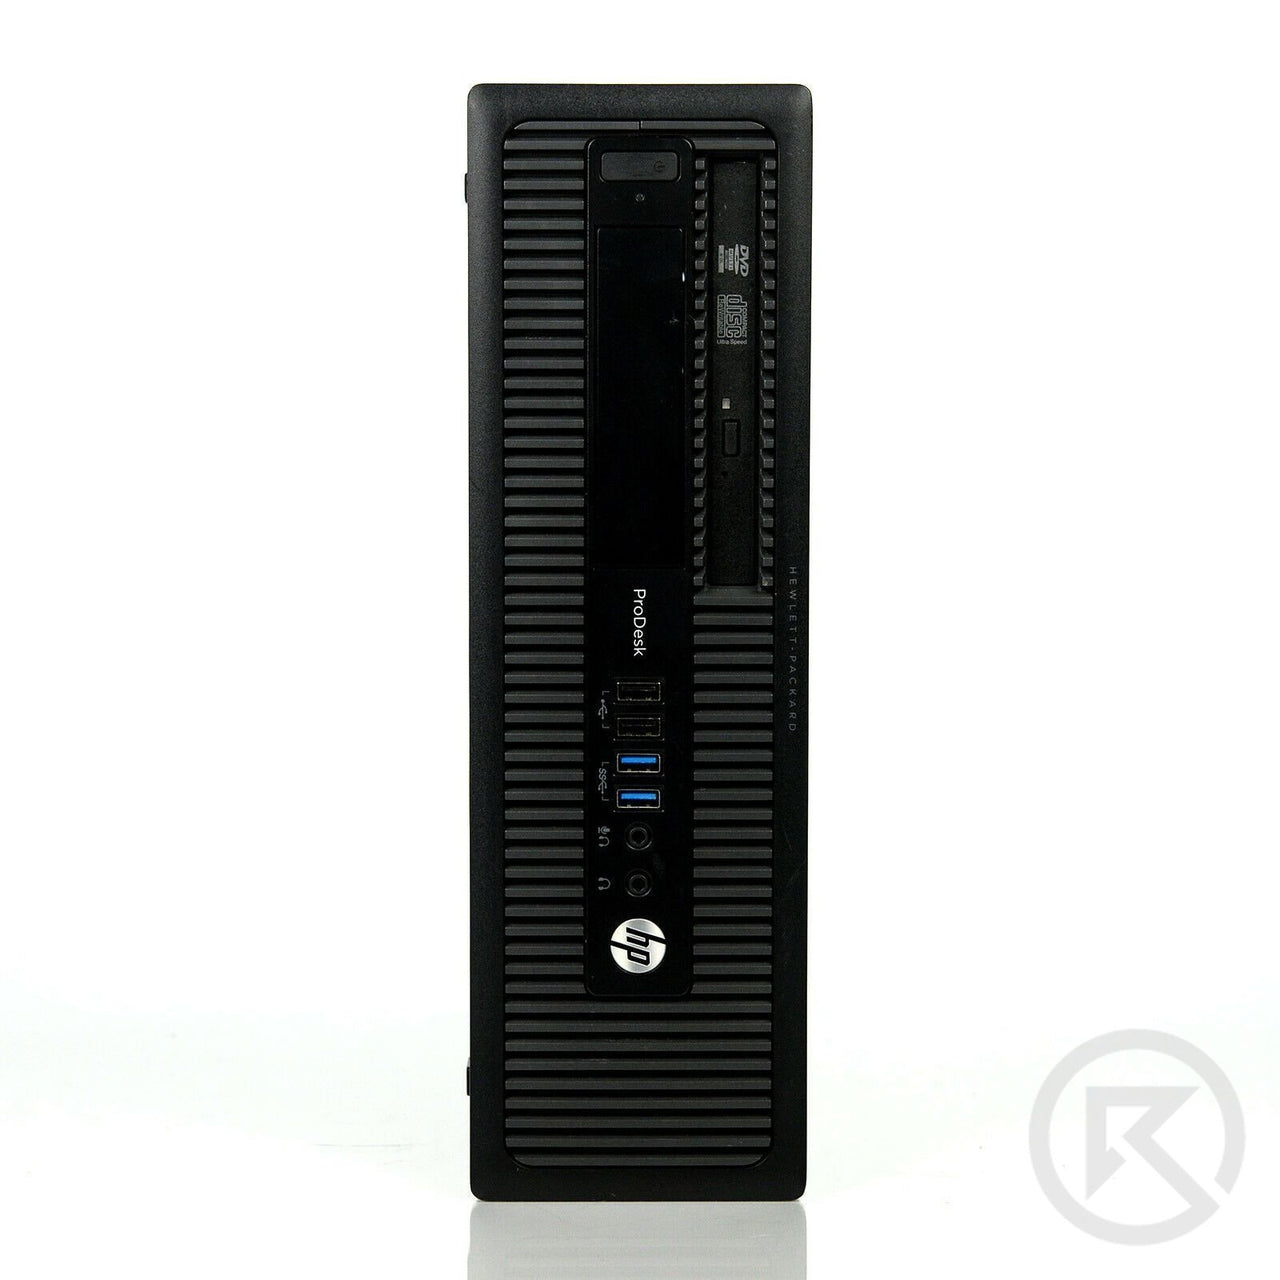 HP Prodesk 600 G1 Intel Core I3 4th Generation Small Form Factor-Computer-RefurbConnect-Refurbished-Computers-Laptops-Printers-New York